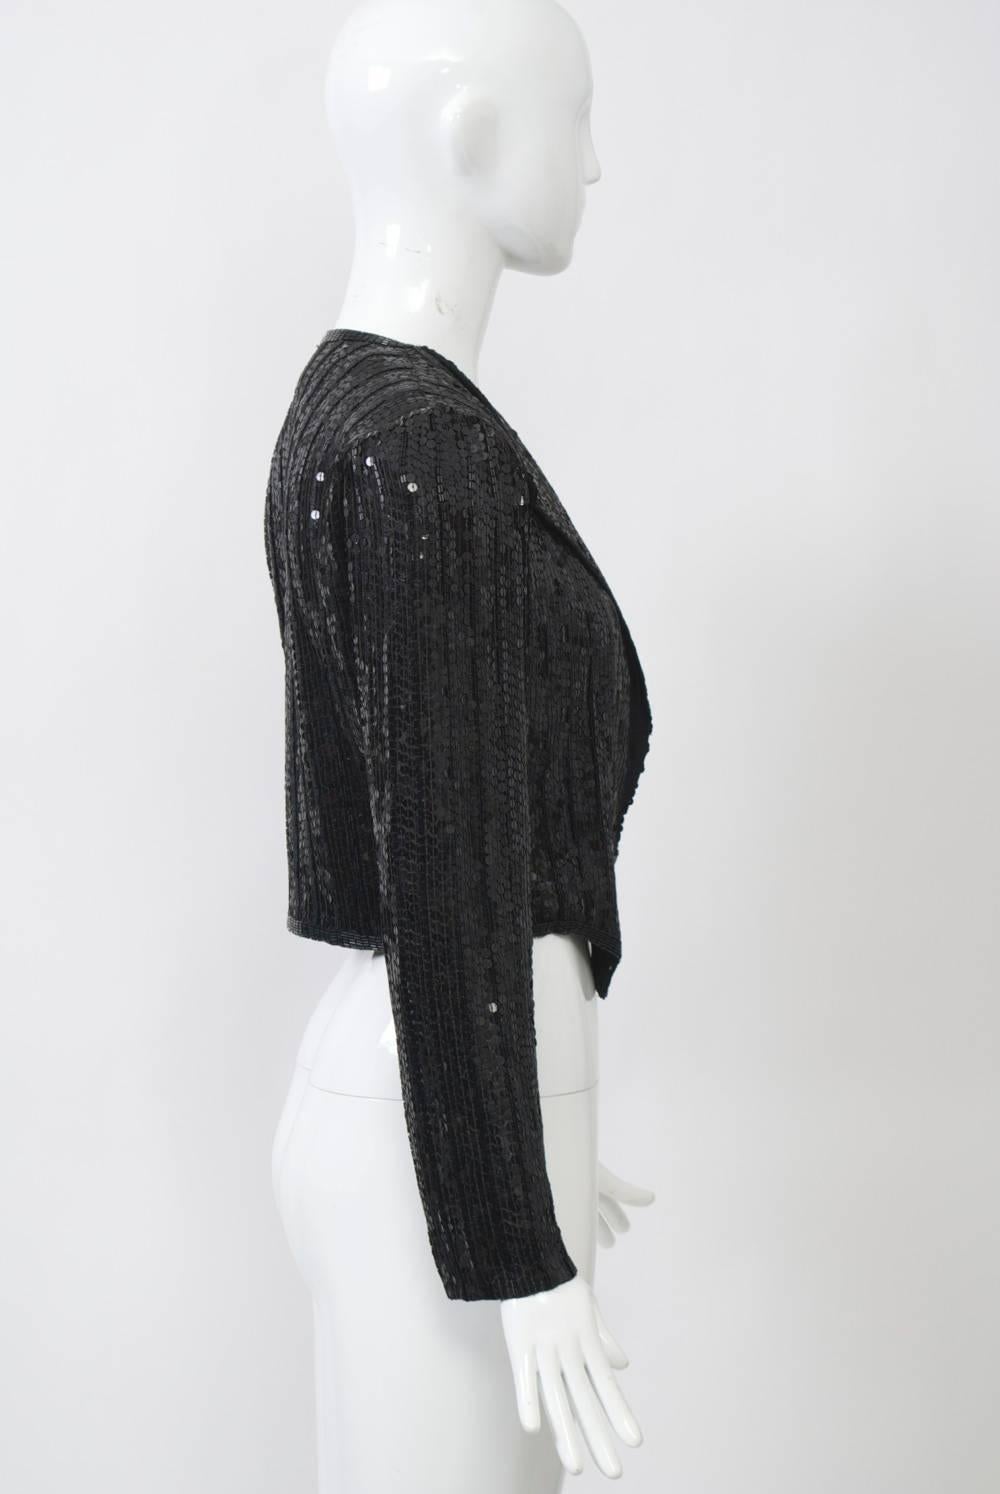 Styled like a men's tuxedo tails coat, this jacket by designer Neil Bieff and artist Arturo Herrera is composed of vertical stripes of black sequins and bugle beads with border trim of the latter. Narrow cut. Beading on a sheer ground. Approximate